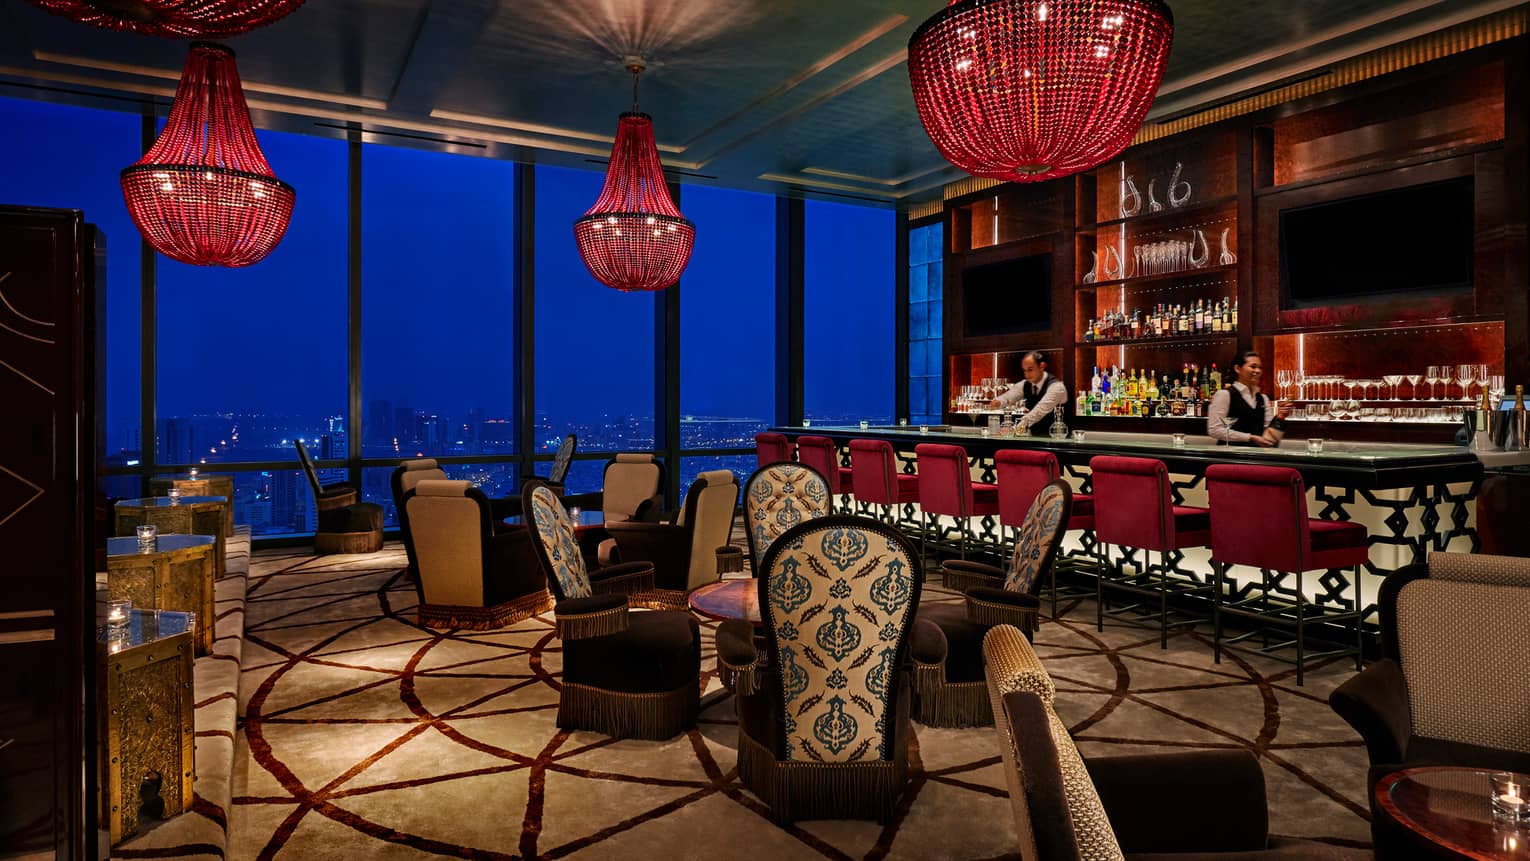 Dimly-lit Blue Moon lounge with large red beaded chandeliers, high-back plush chairs with decorative prints, bar